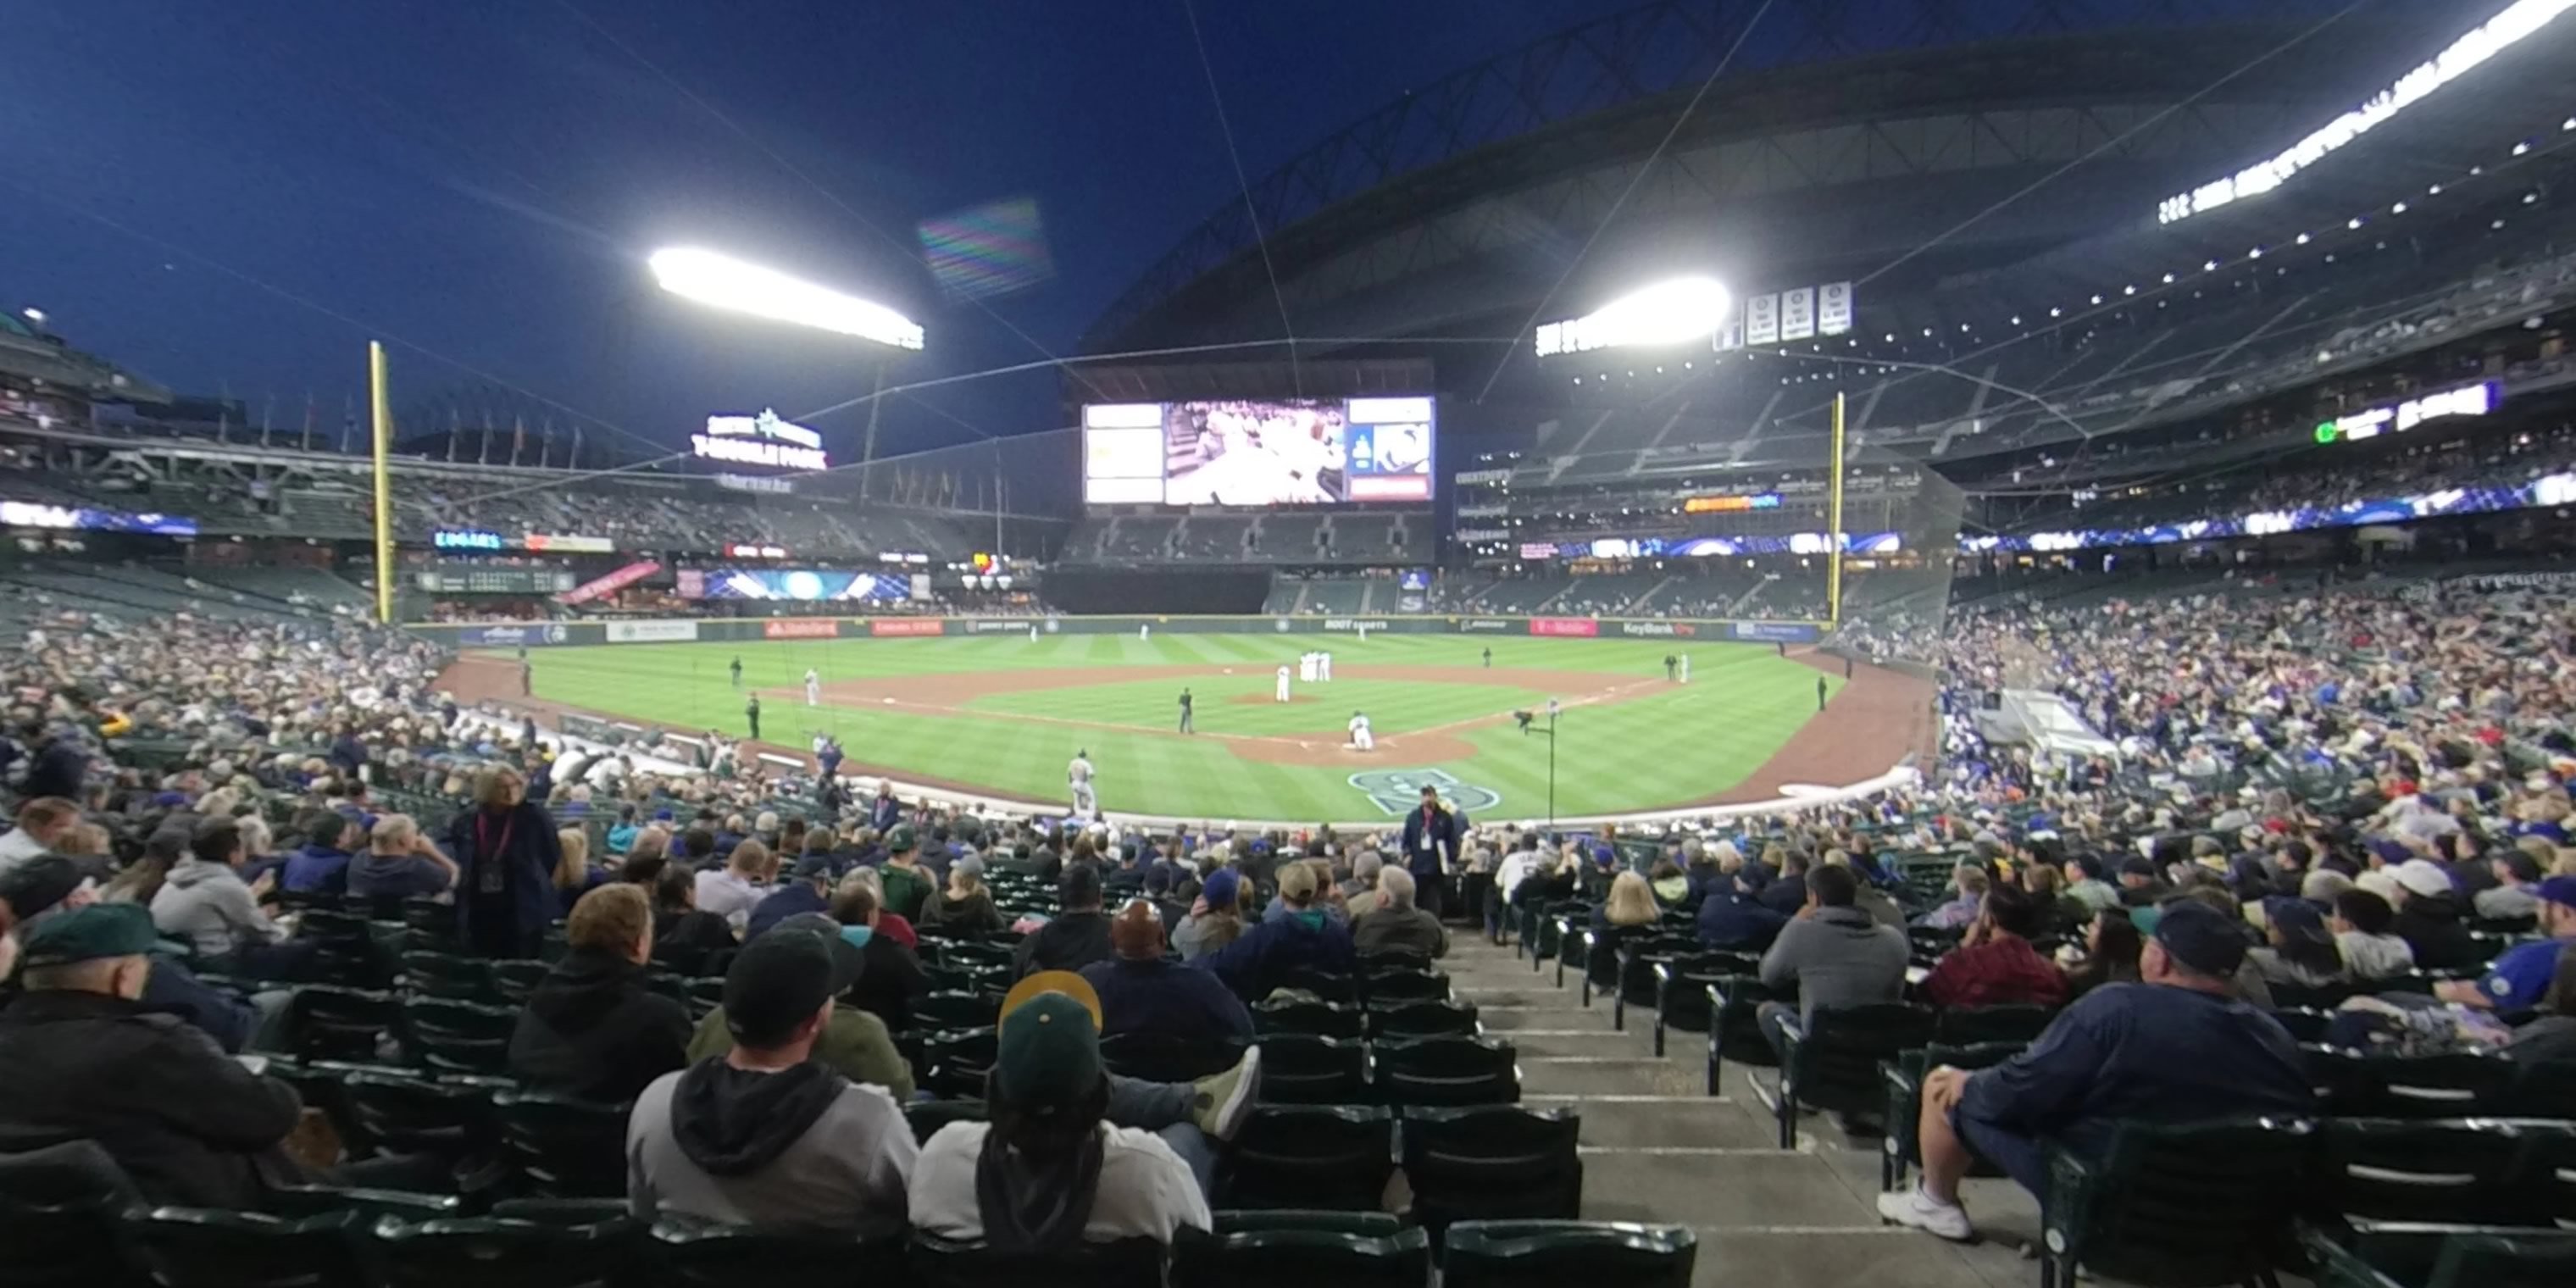 section 131 panoramic seat view  for baseball - t-mobile park